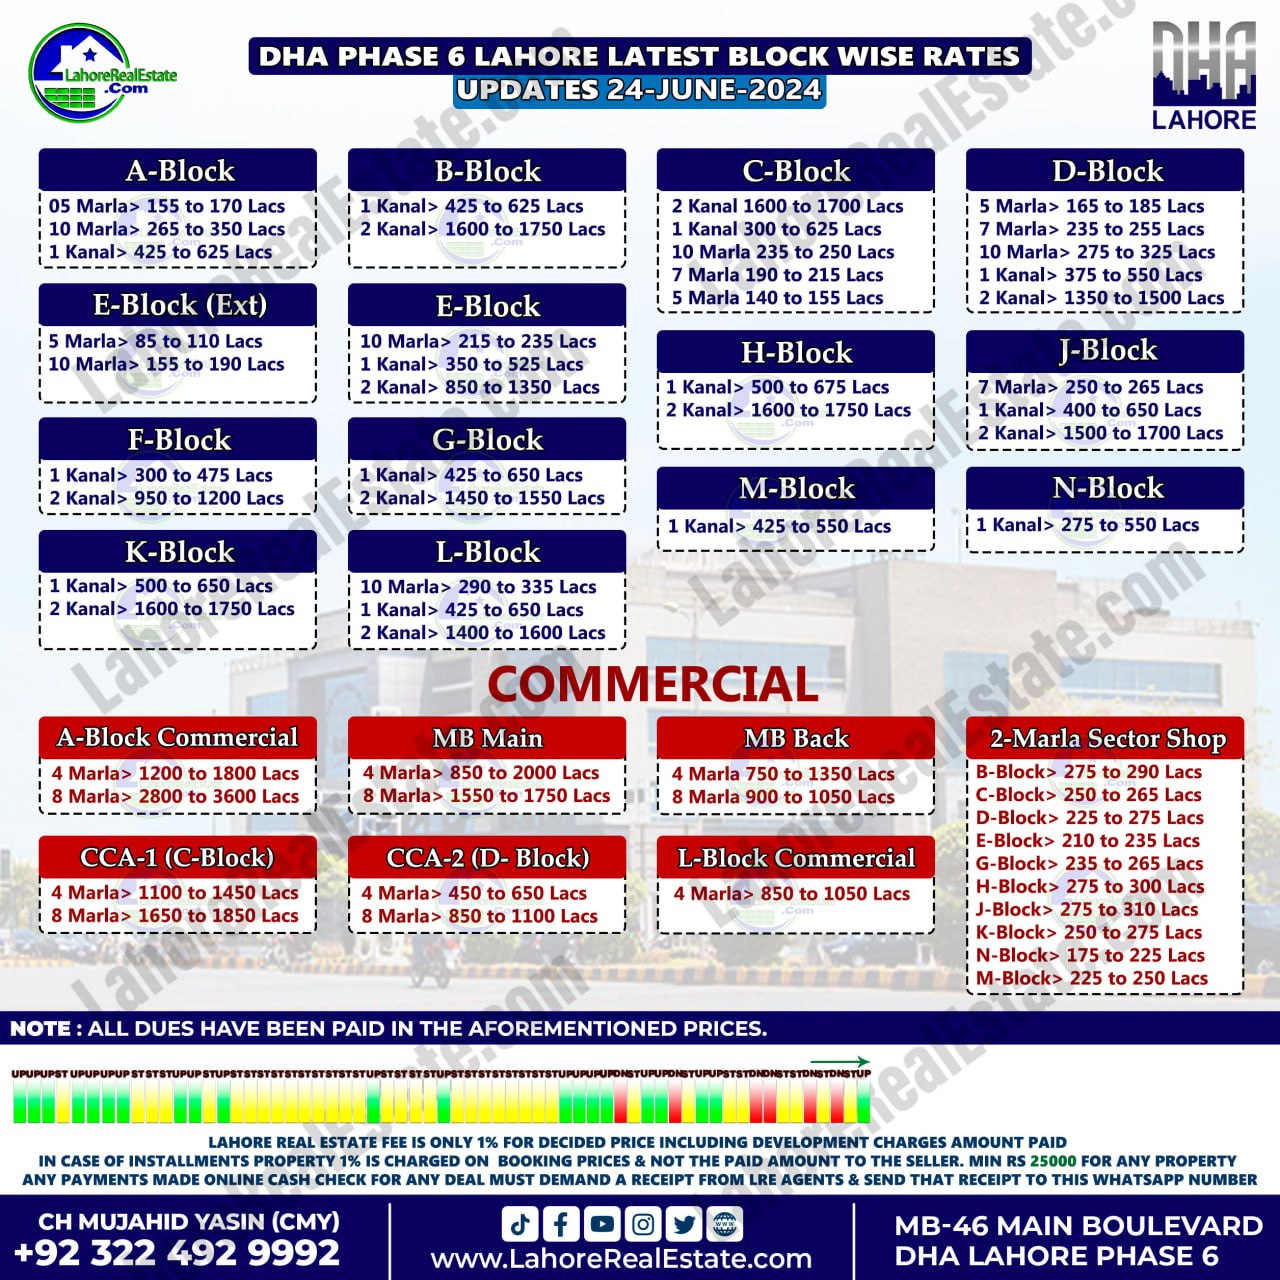 DHA Lahore Phase 6 Plot Prices Blockwise Rates June 24, 2024